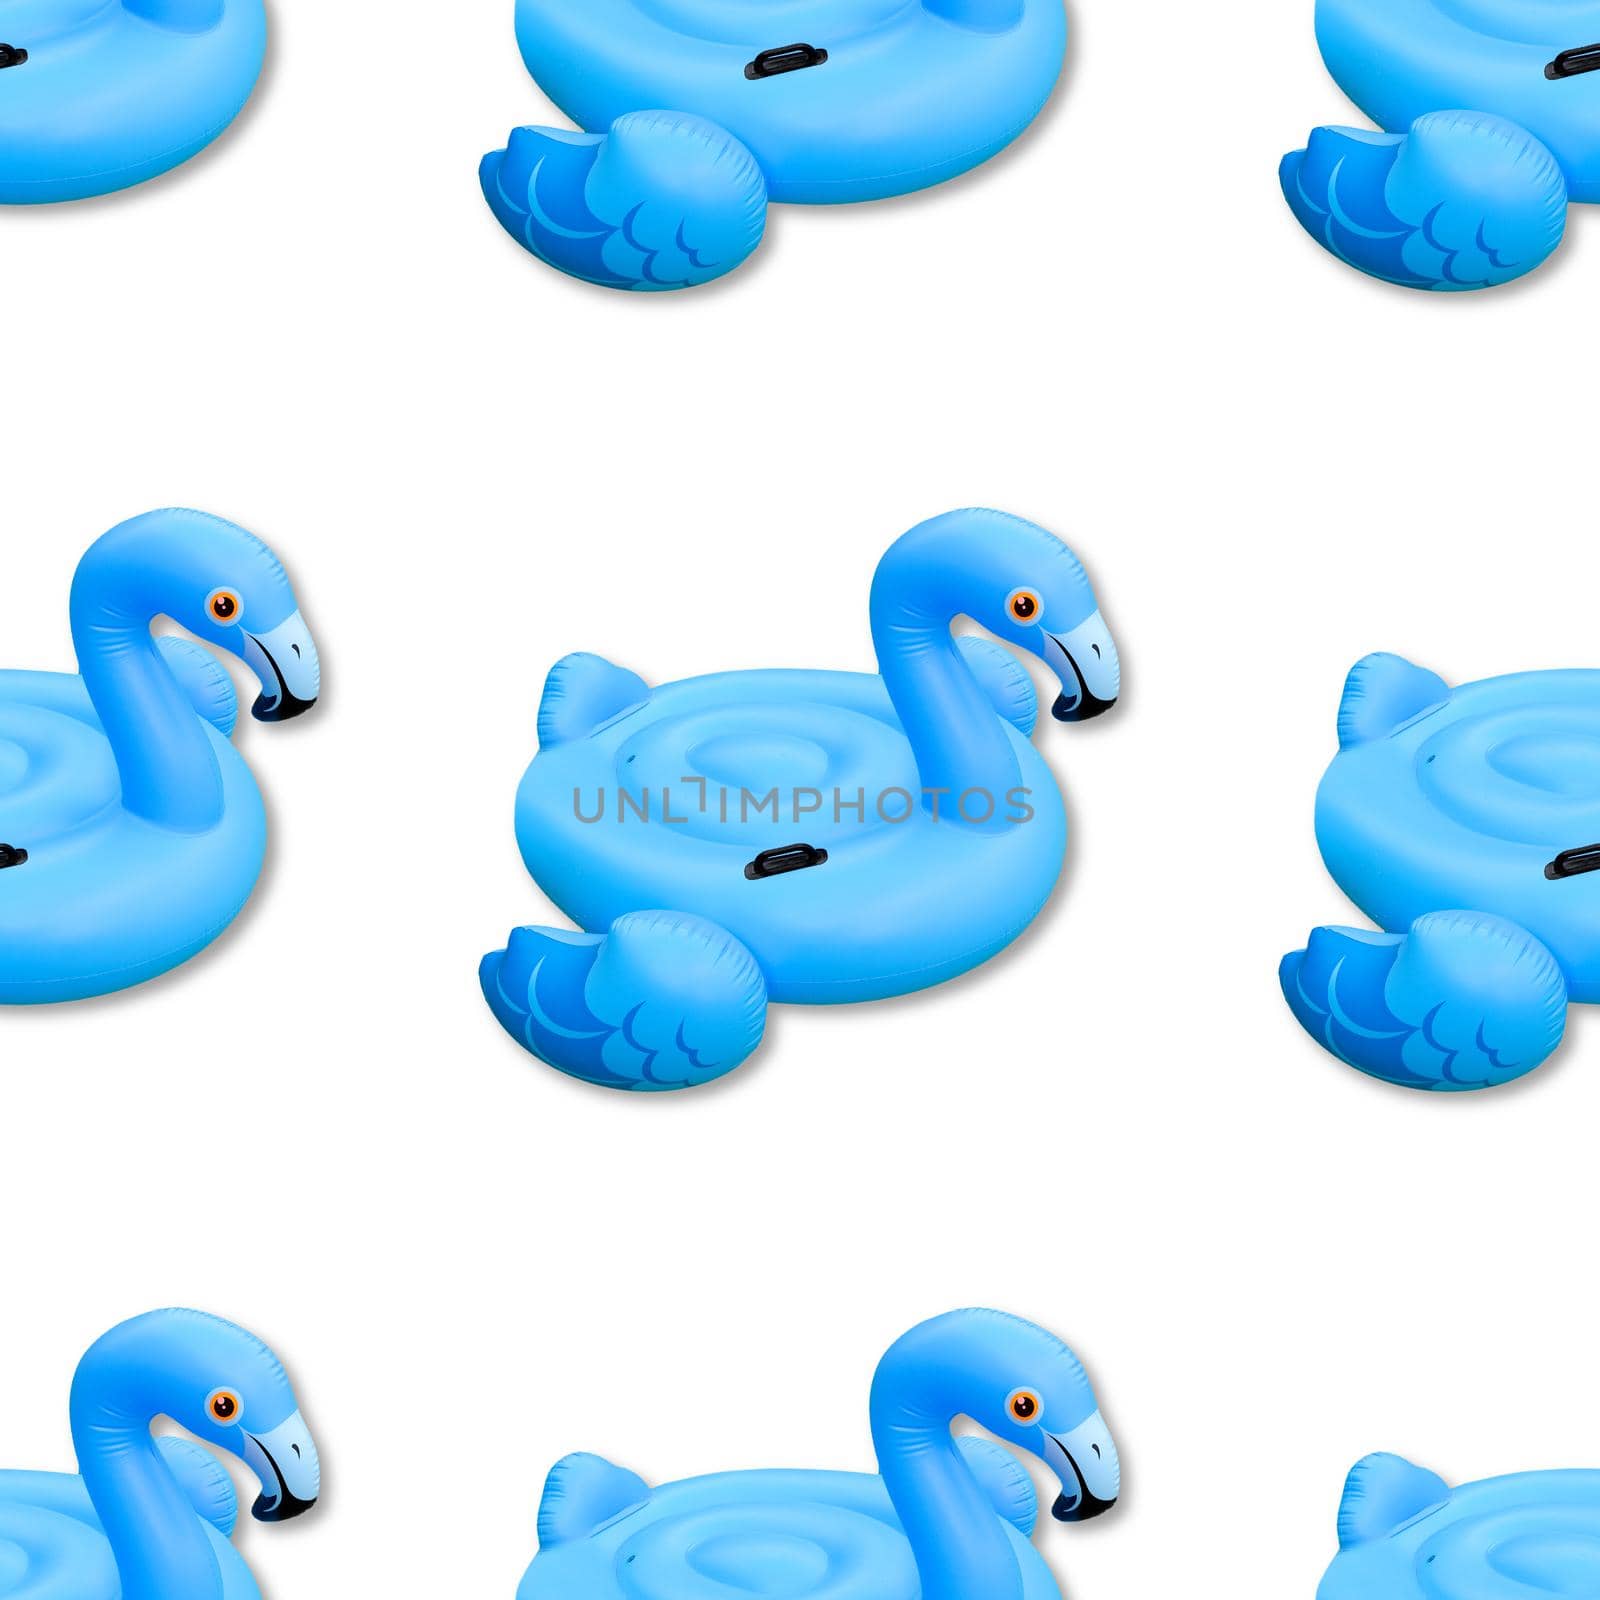 Blue flamingo isolated on background. Swimming pool toy in shape of blue flamingo seamless pattern. Flamingo inflatable cut out. Top view, flat lay.